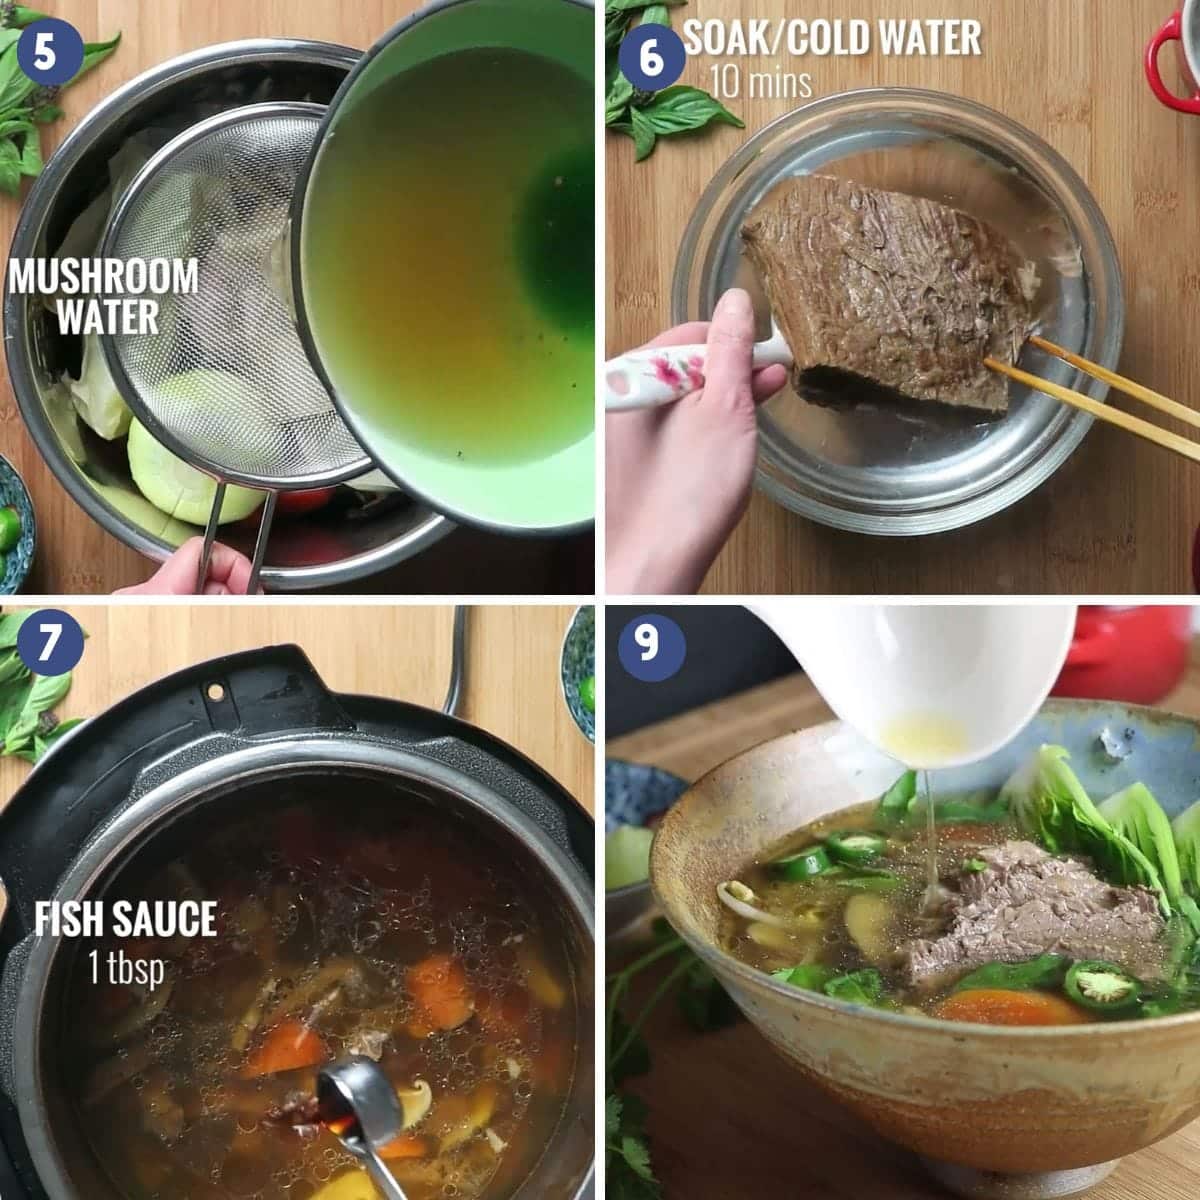 Person demos how to make pho and soak the brisket and season the broth before serving